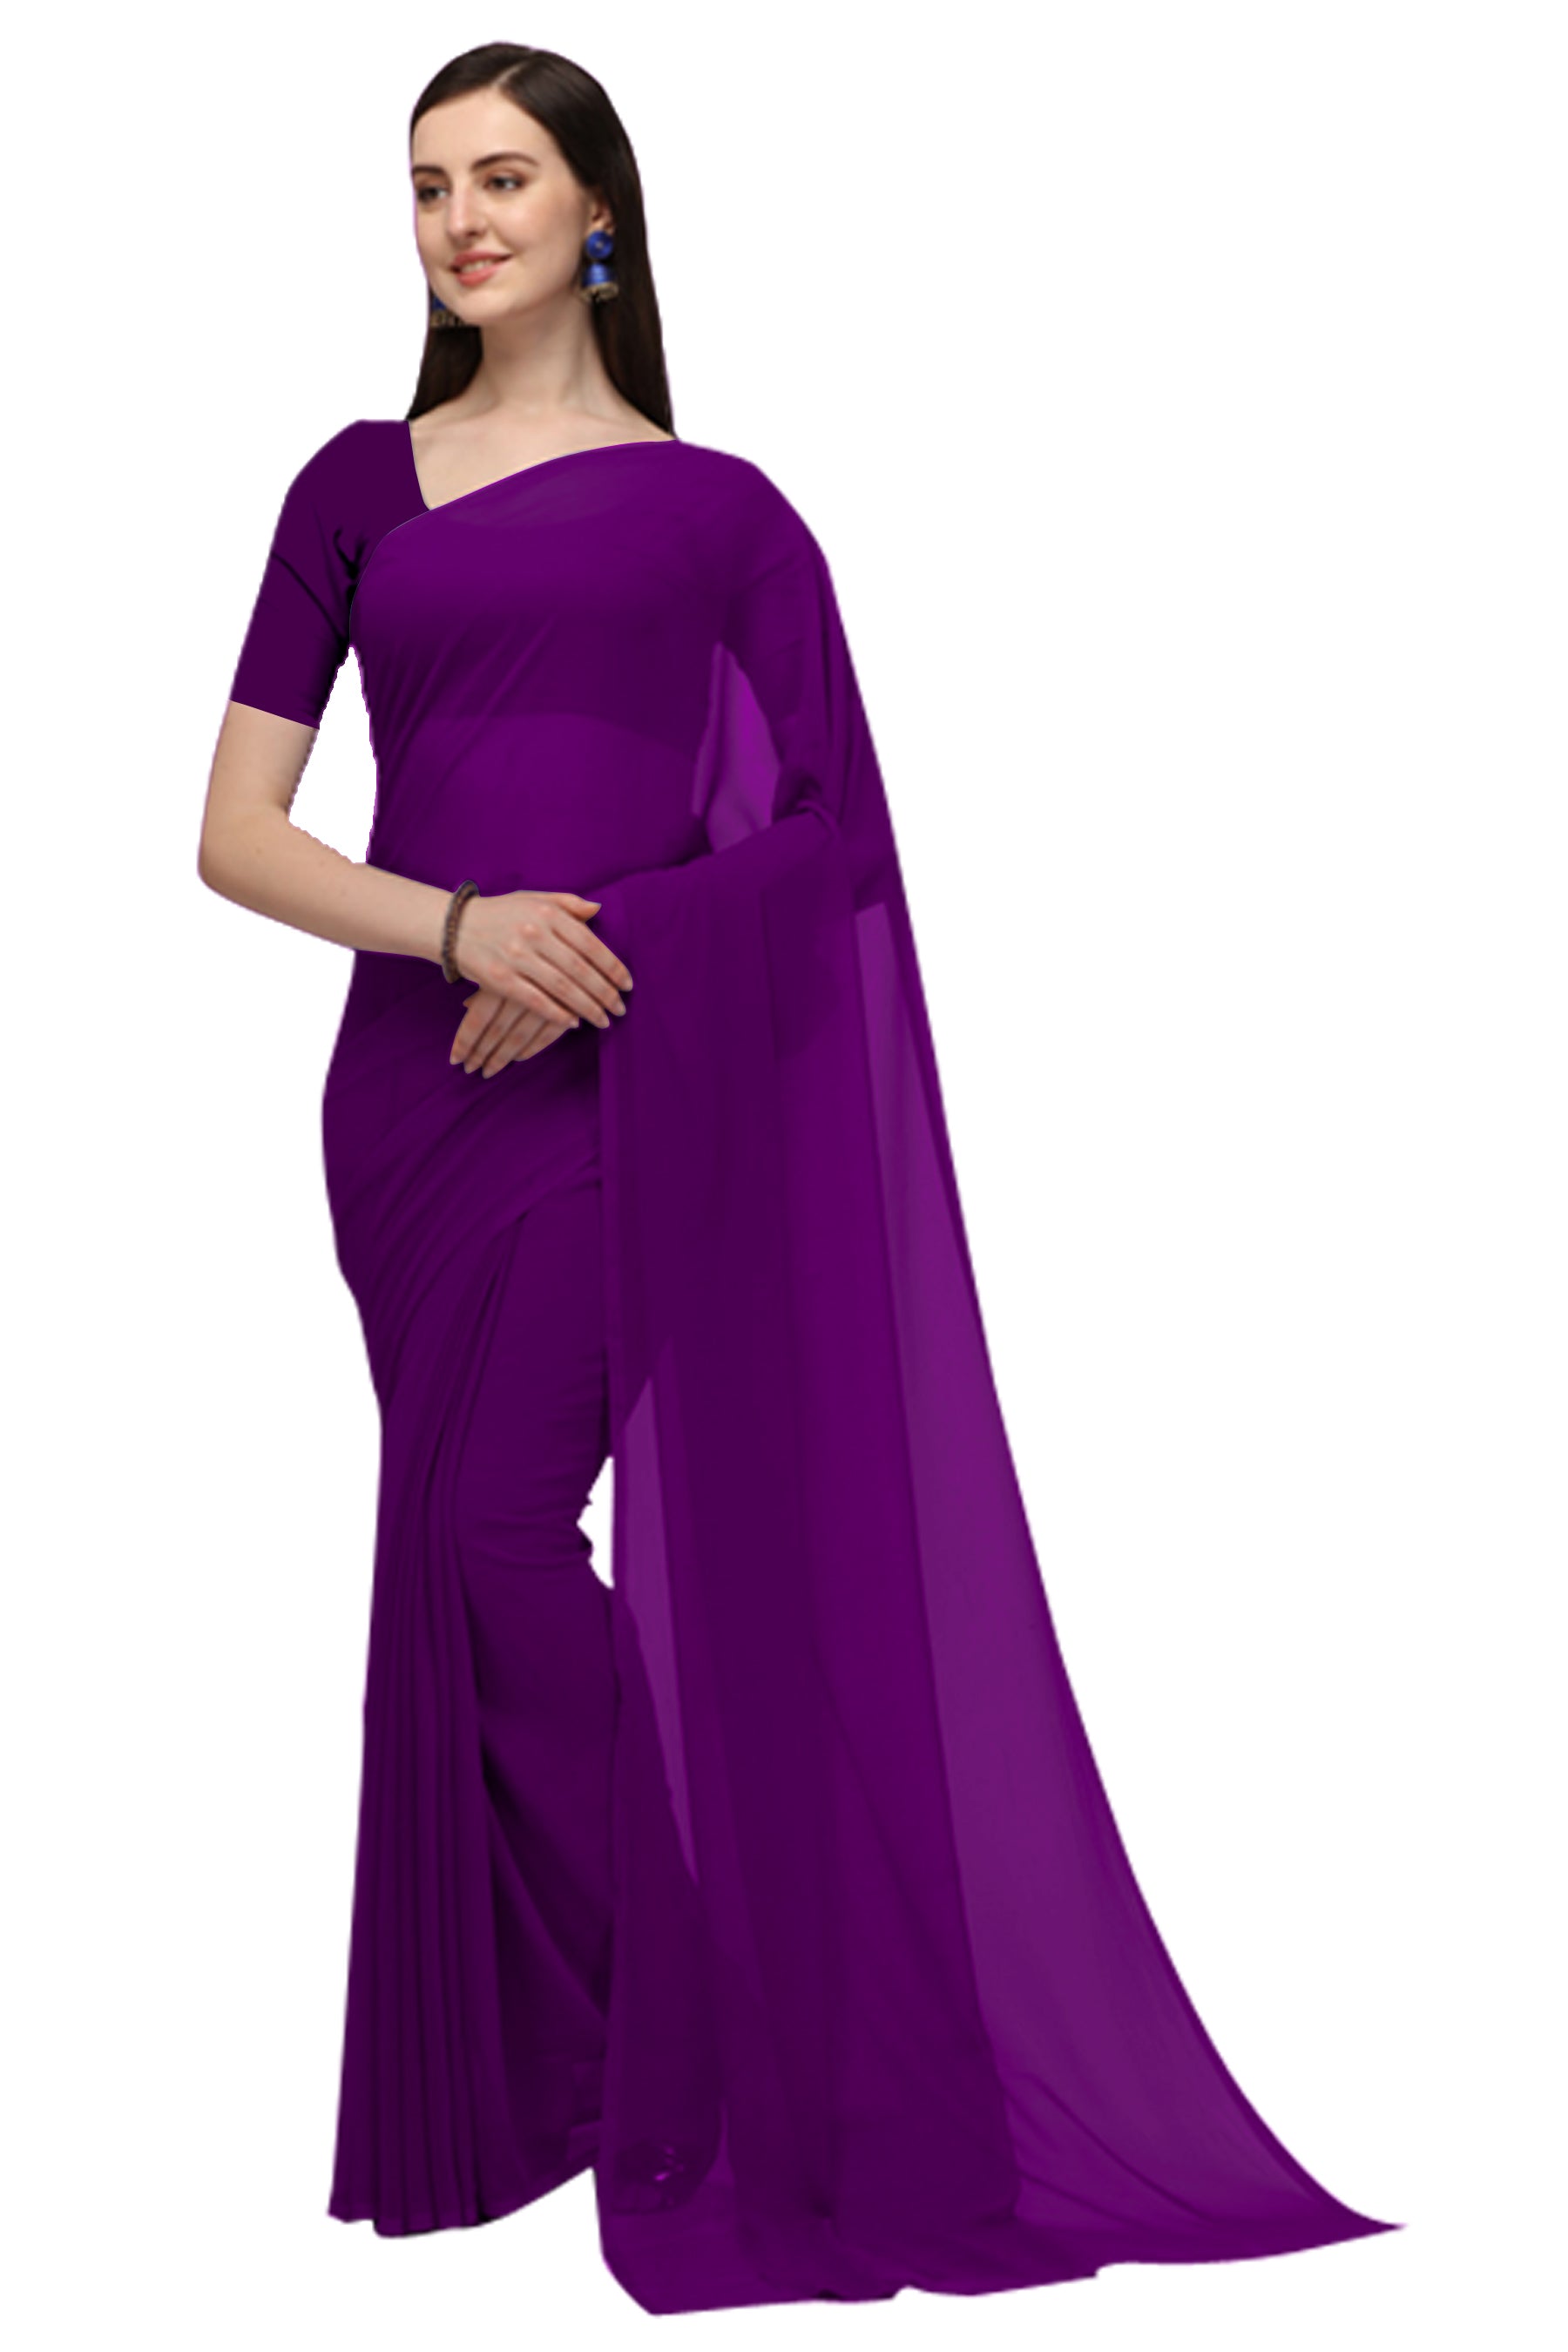 Women's Plain Woven Daily Wear  Formal Georgette Sari With Blouse Piece (Purple) - NIMIDHYA